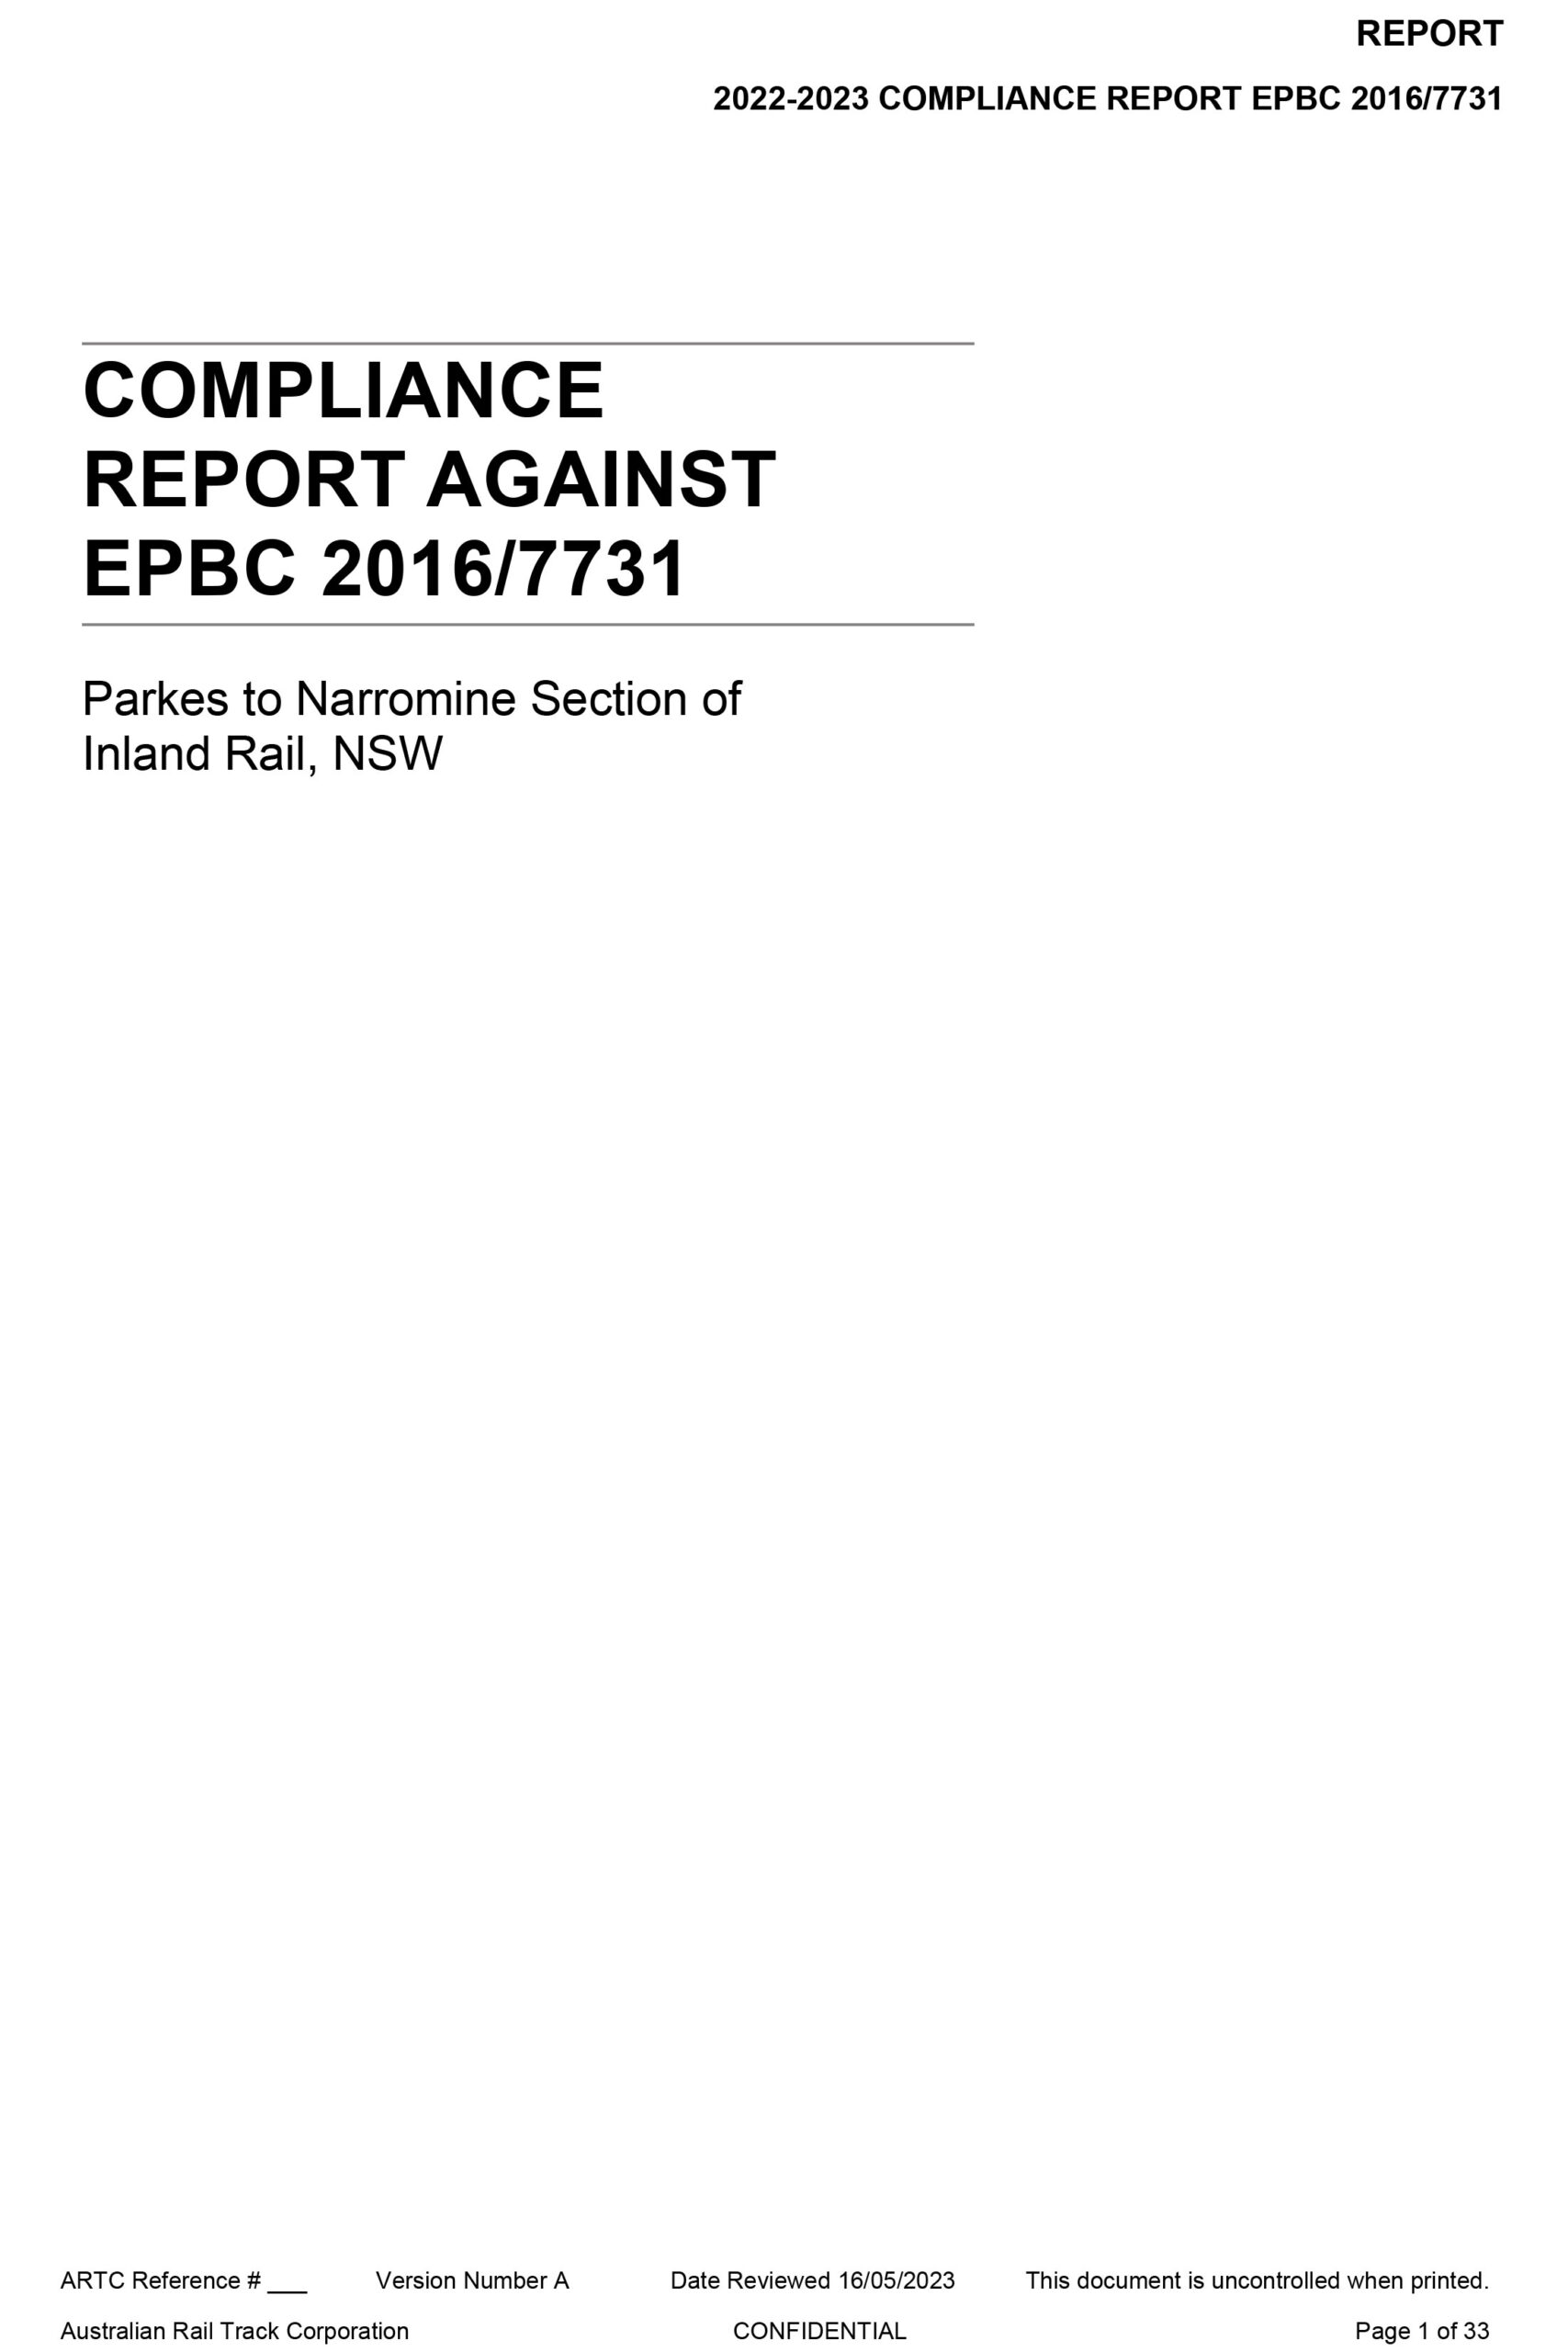 Image thumbnail of Parkes to Narromine Compliance Report against EPBC 2016-7731 2022-23 document